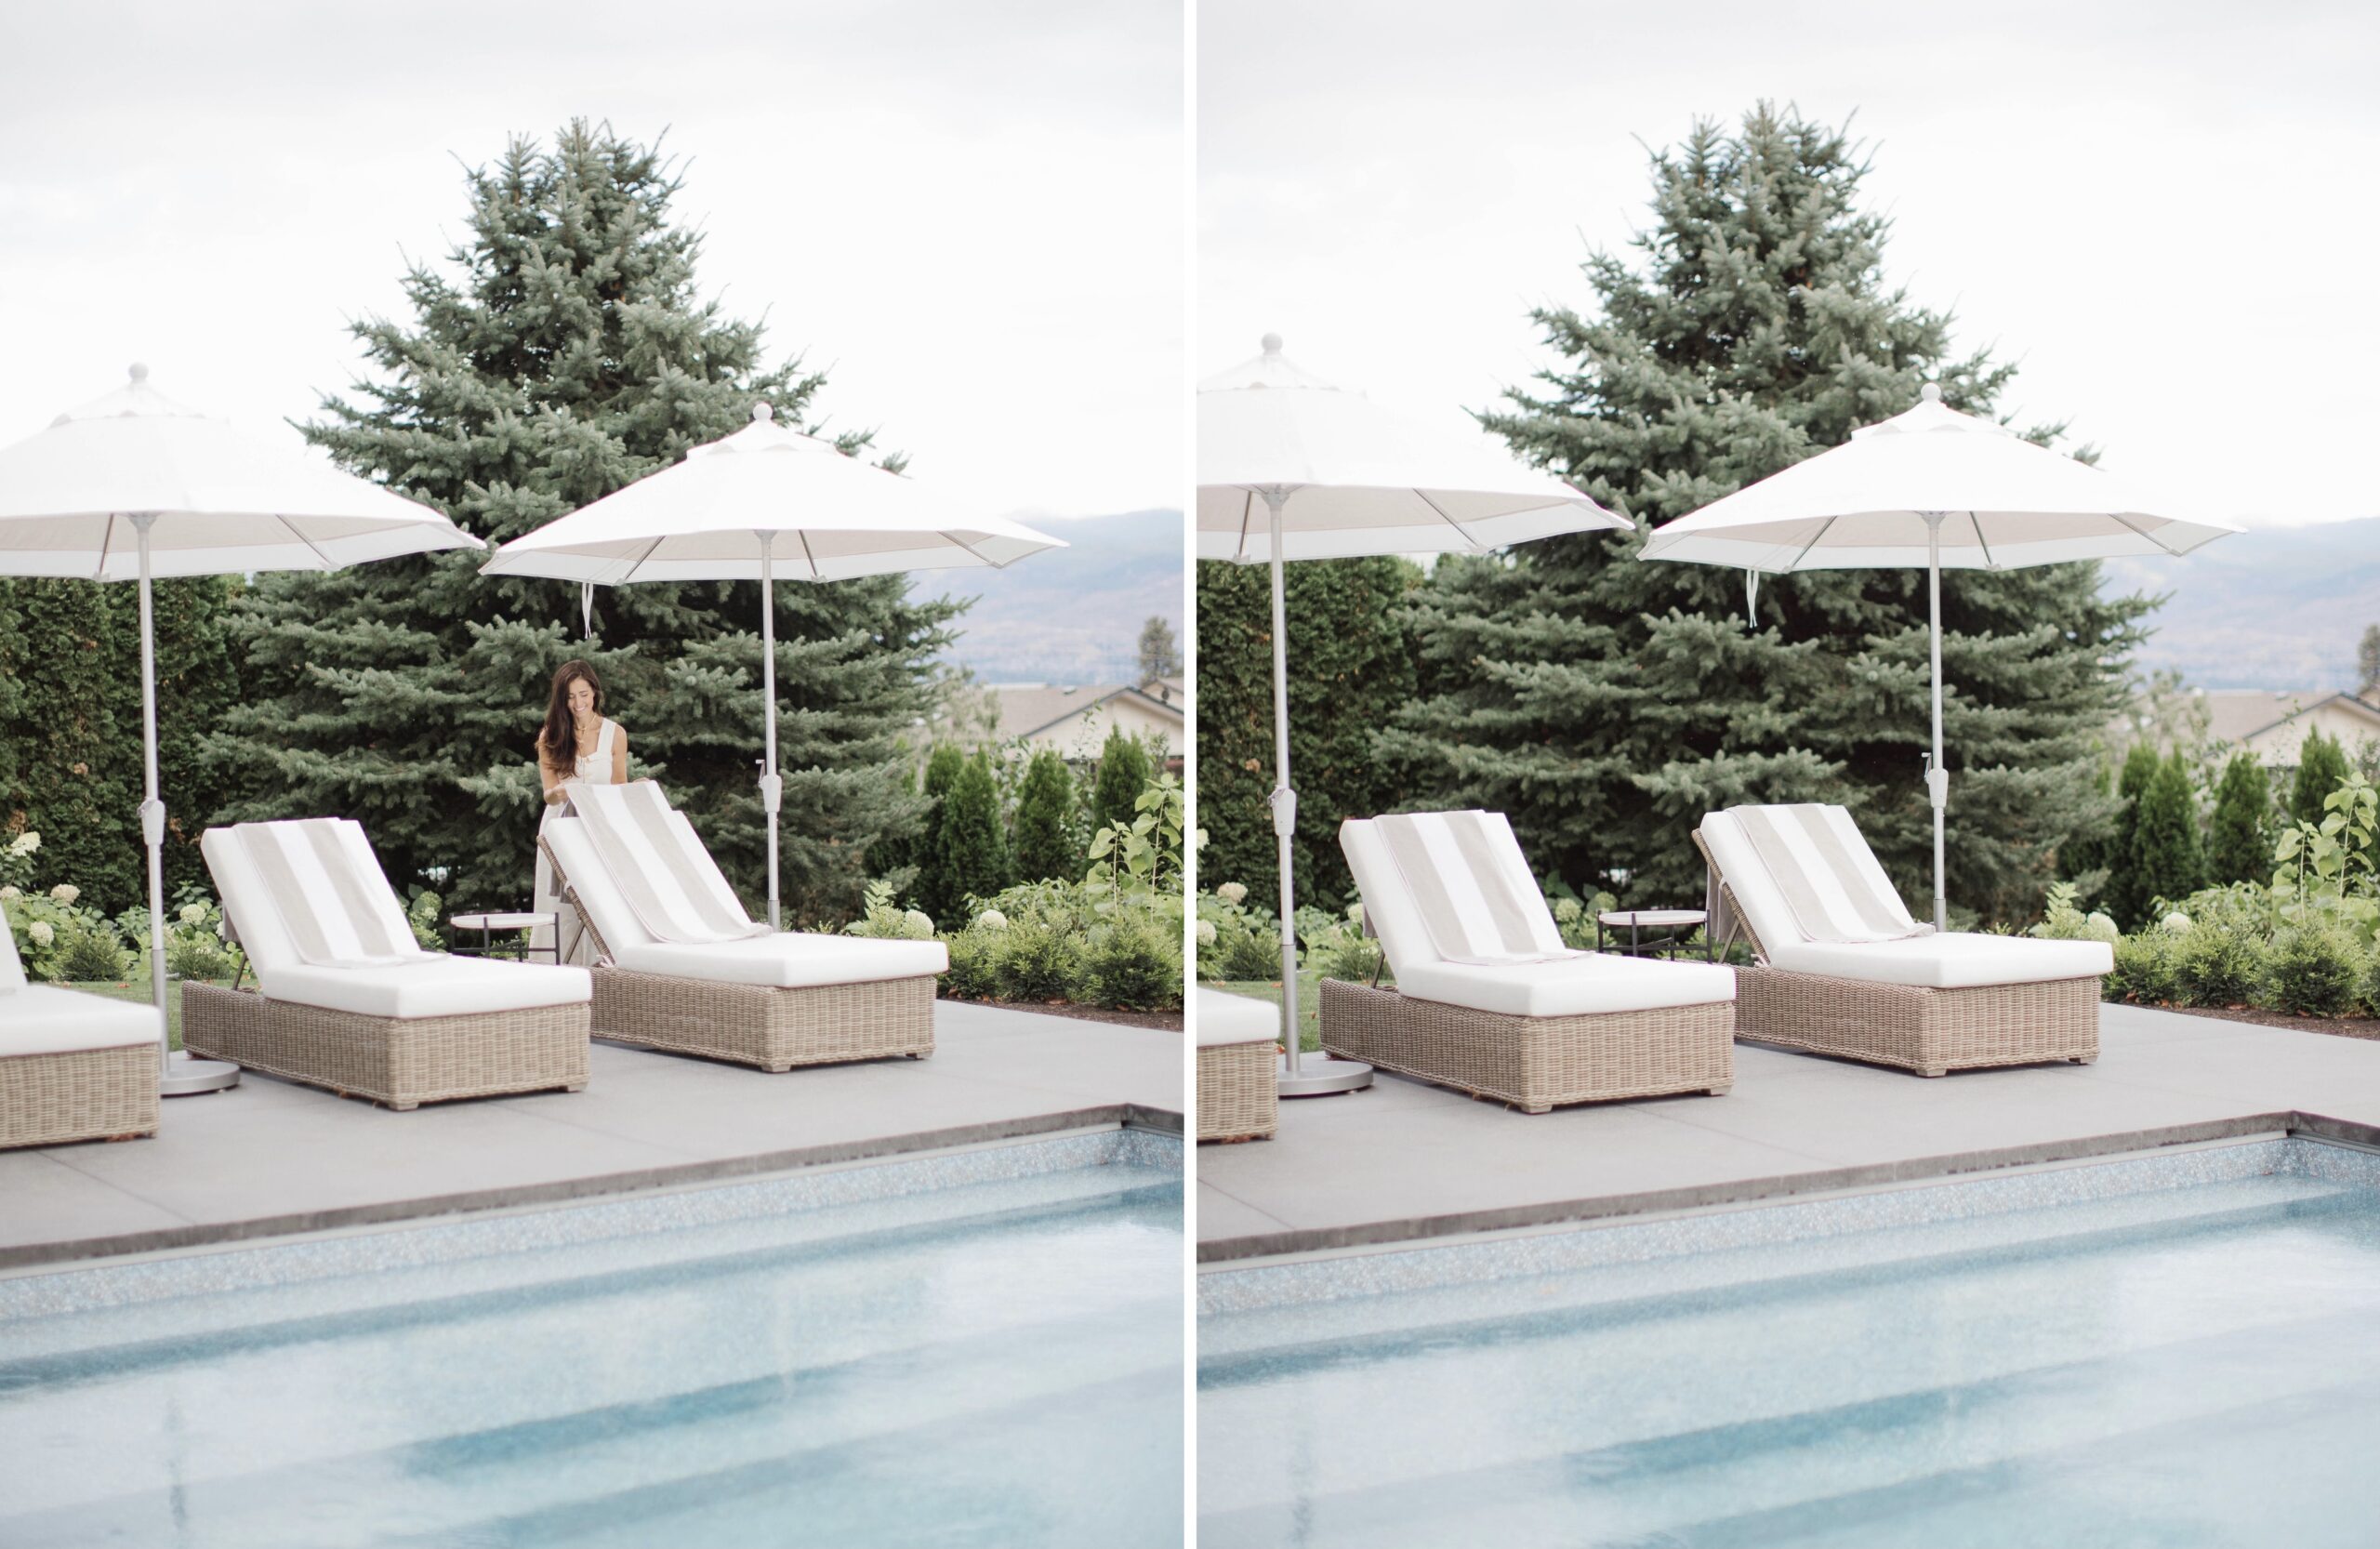 Hauser Poolside Loungers with Umbrellas